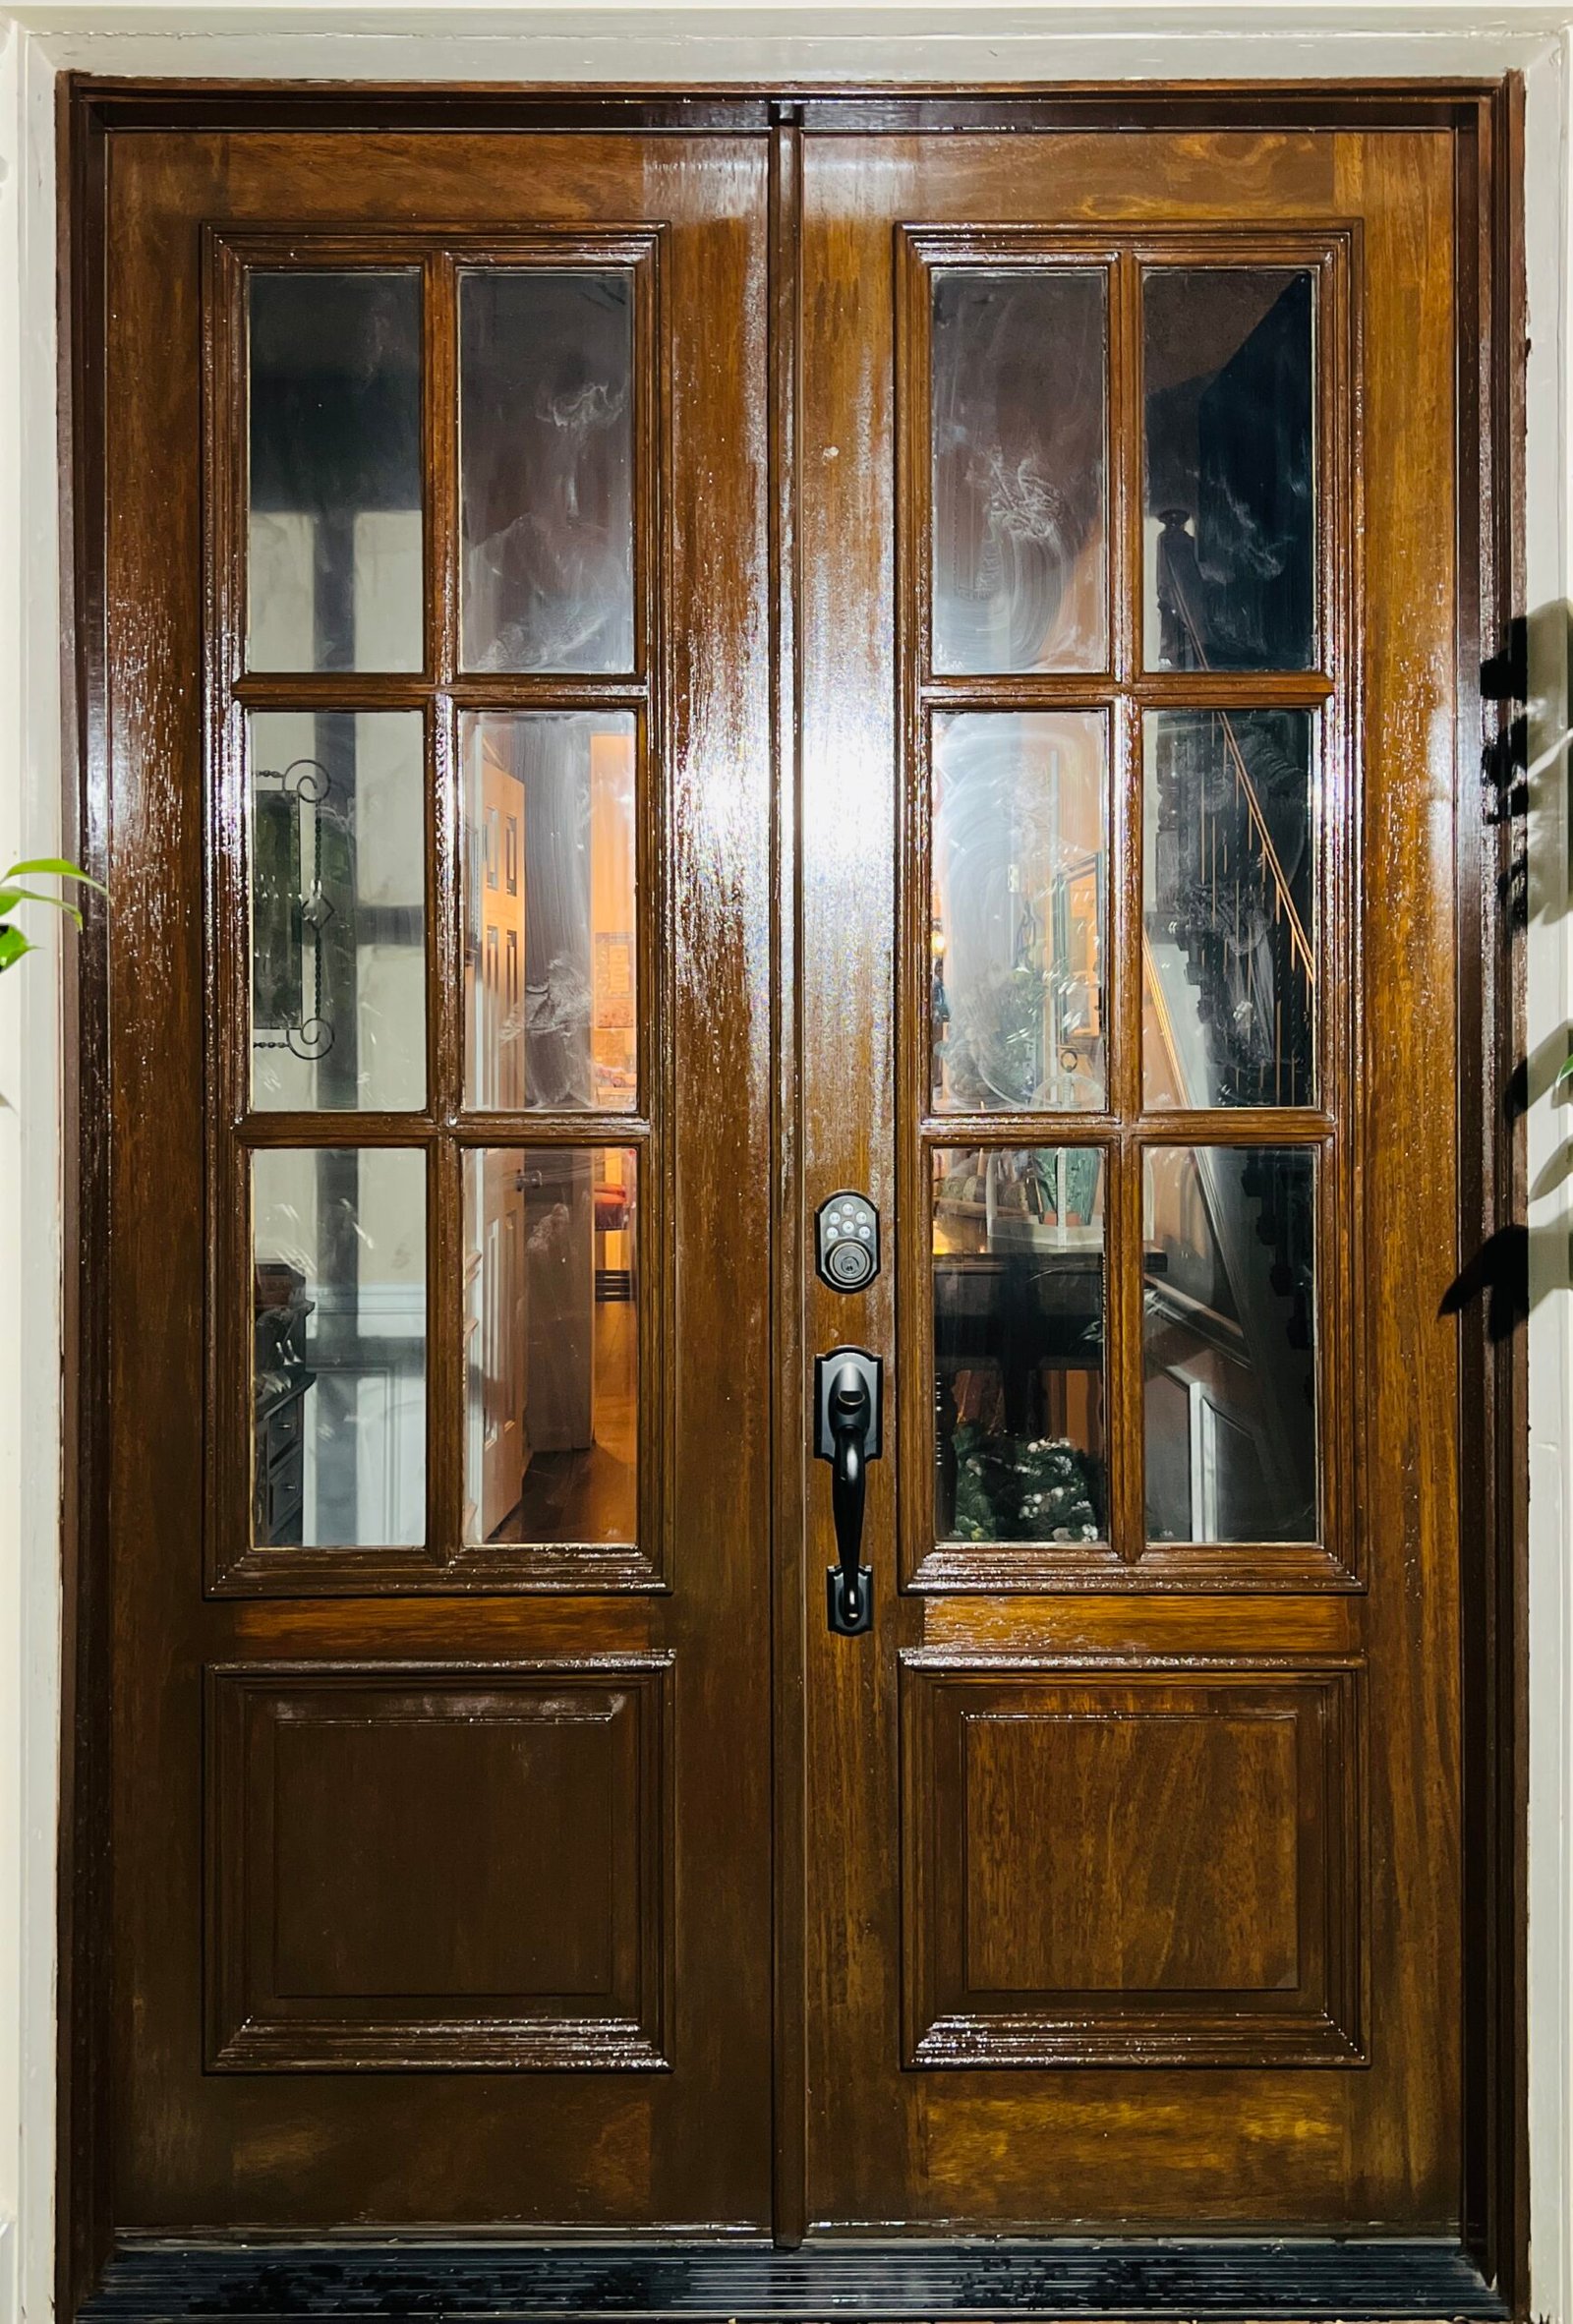 Repainted wooden door with a fresh, vibrant finish